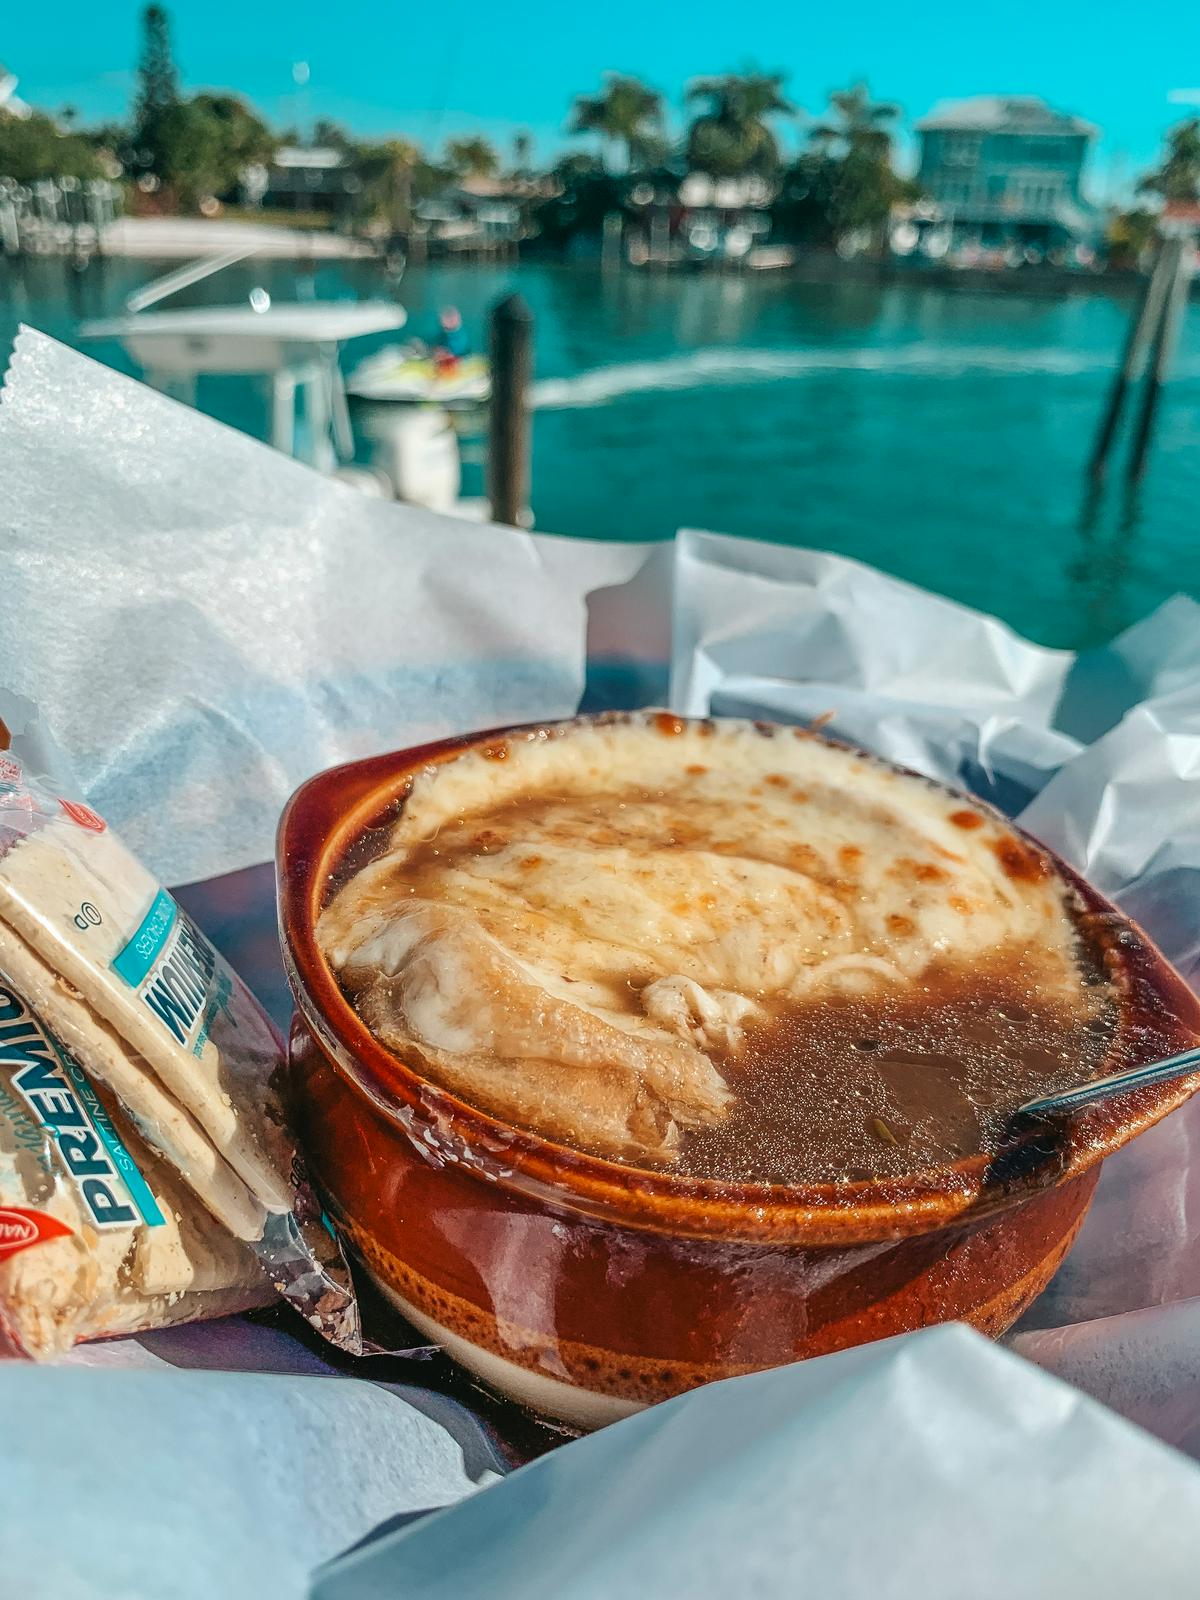 The Wharf French onion soup